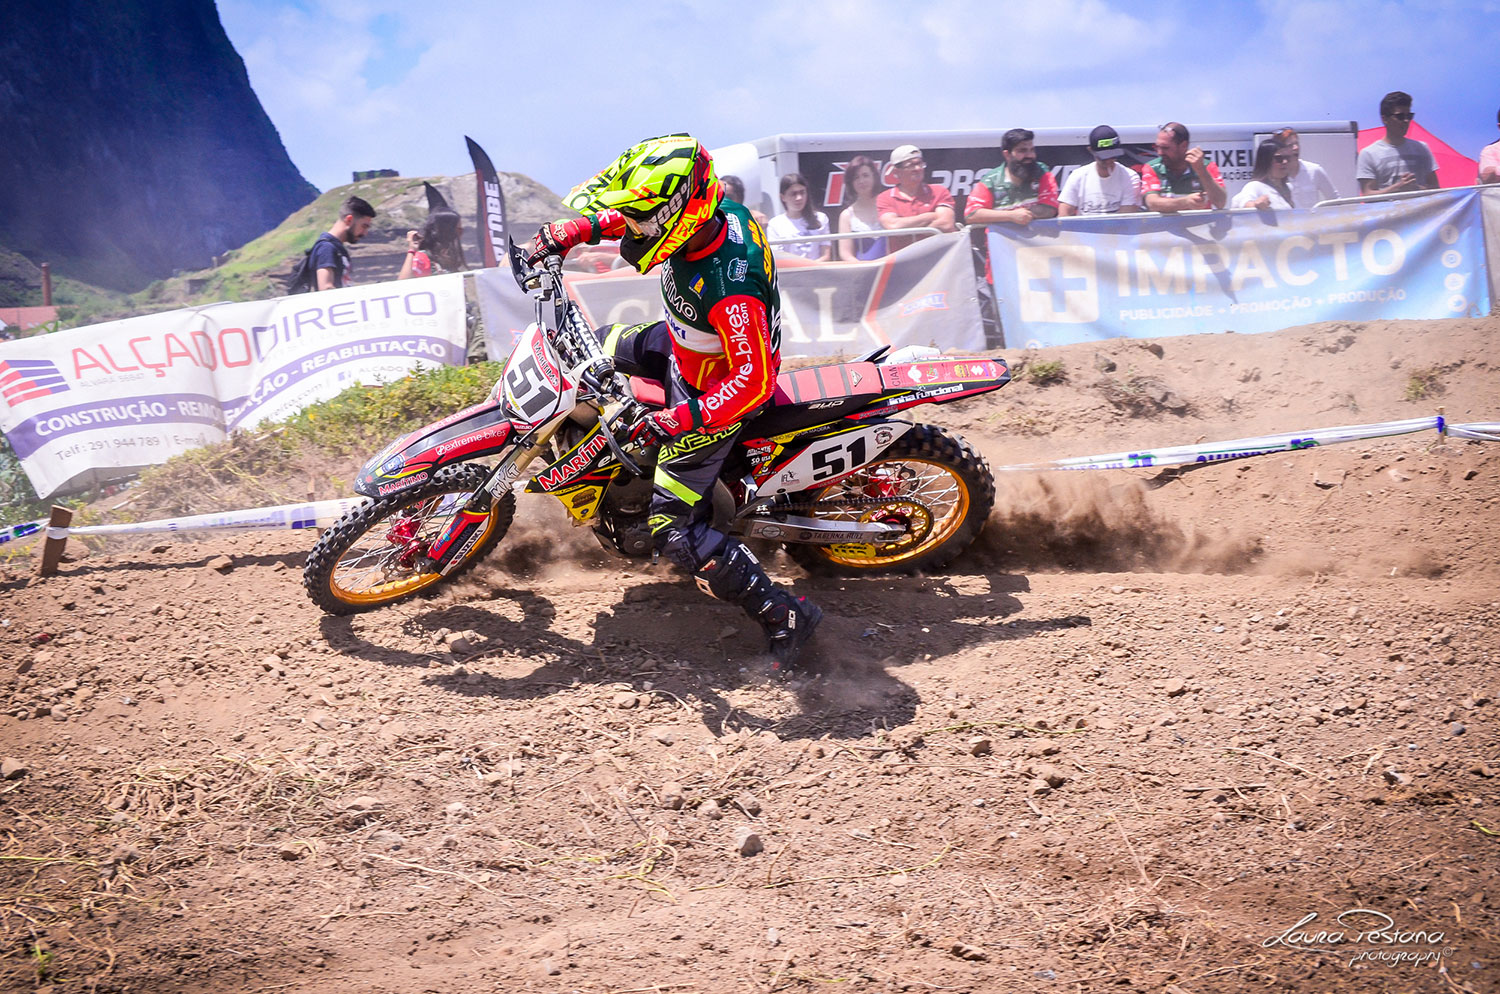 A rider making a berm on the track